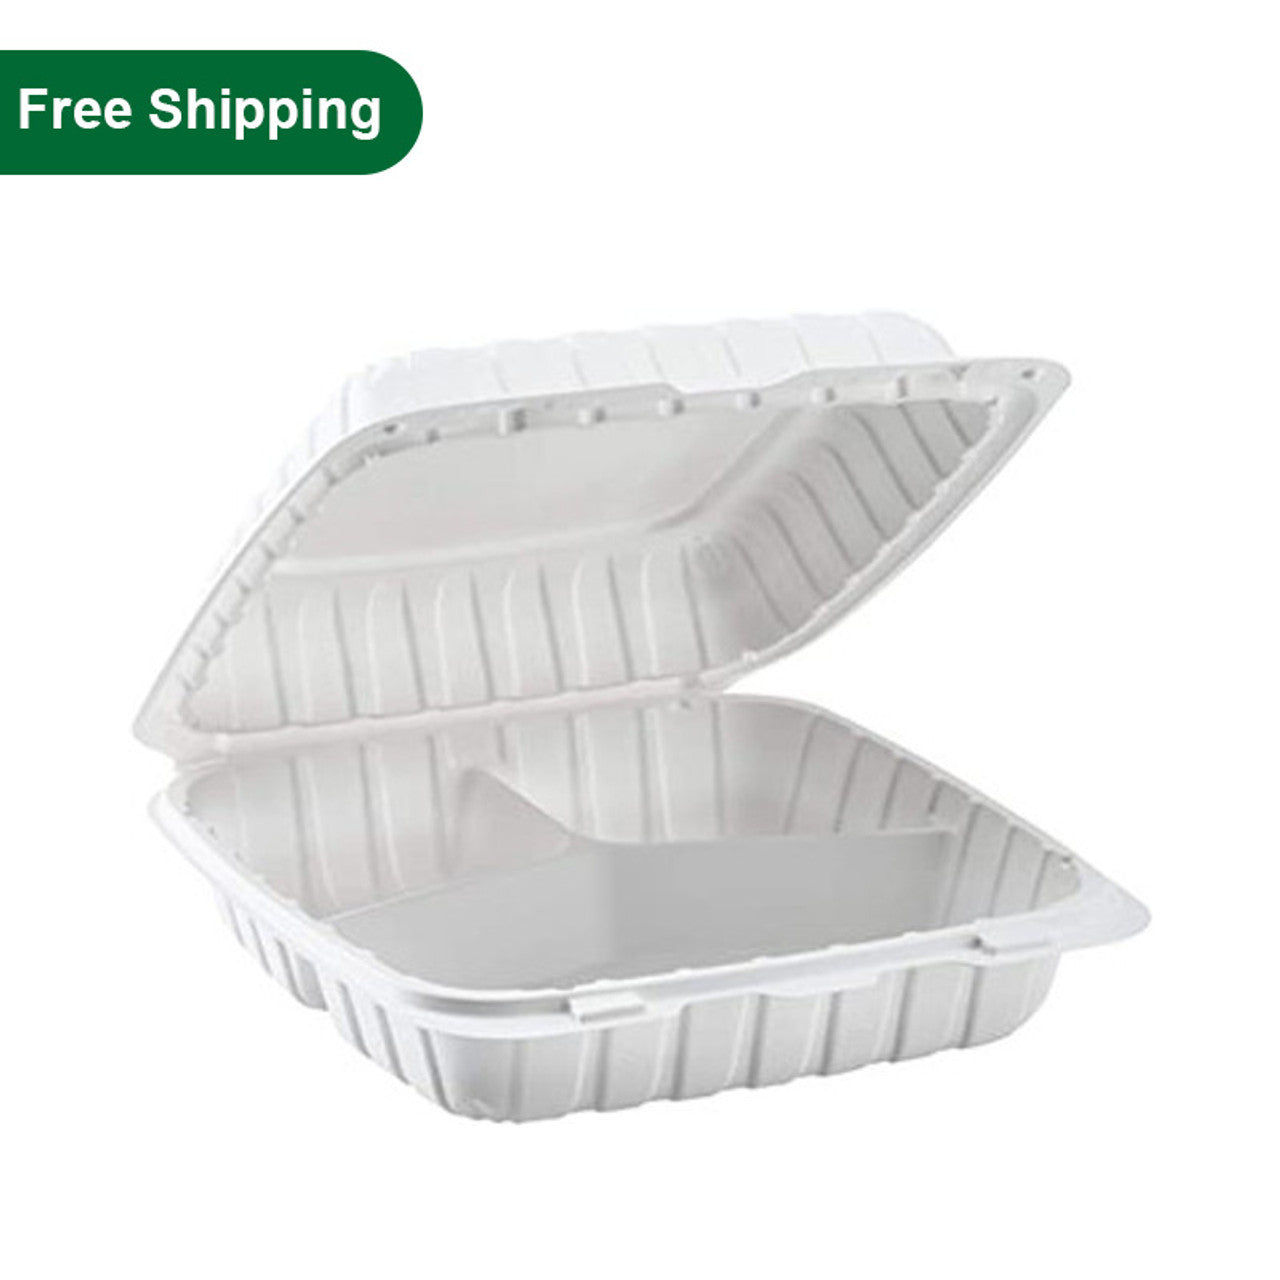 Convenient Culinary Excellence: 150-Set 9" 3-Compartment Plastic Clamshells - Premium Meal Containers - Pony Packaging